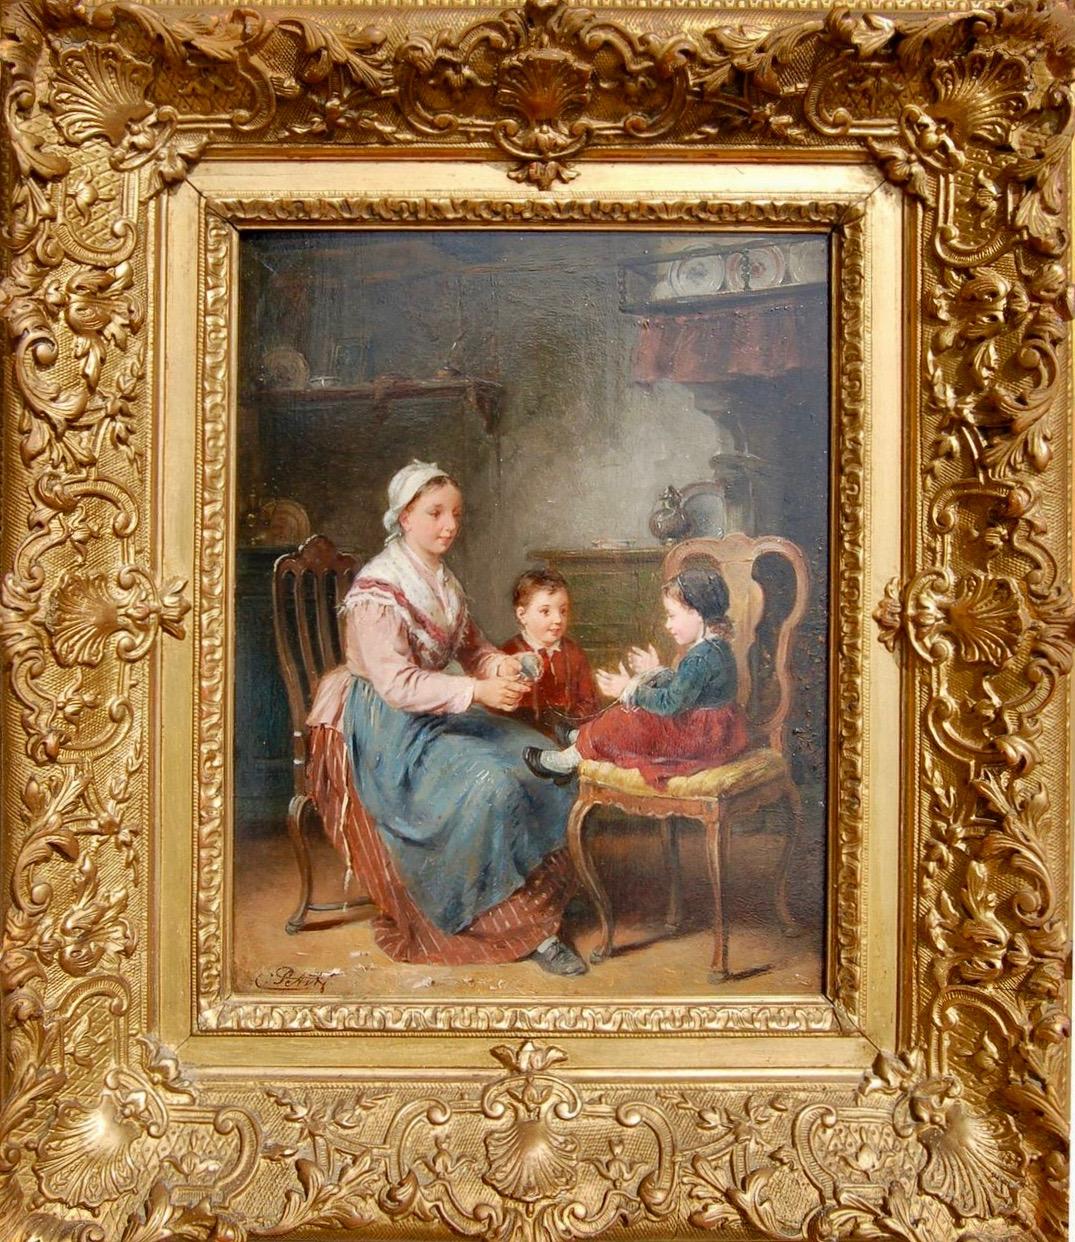 19th century interior of a mother with her children playing together - Painting by Charles Petit